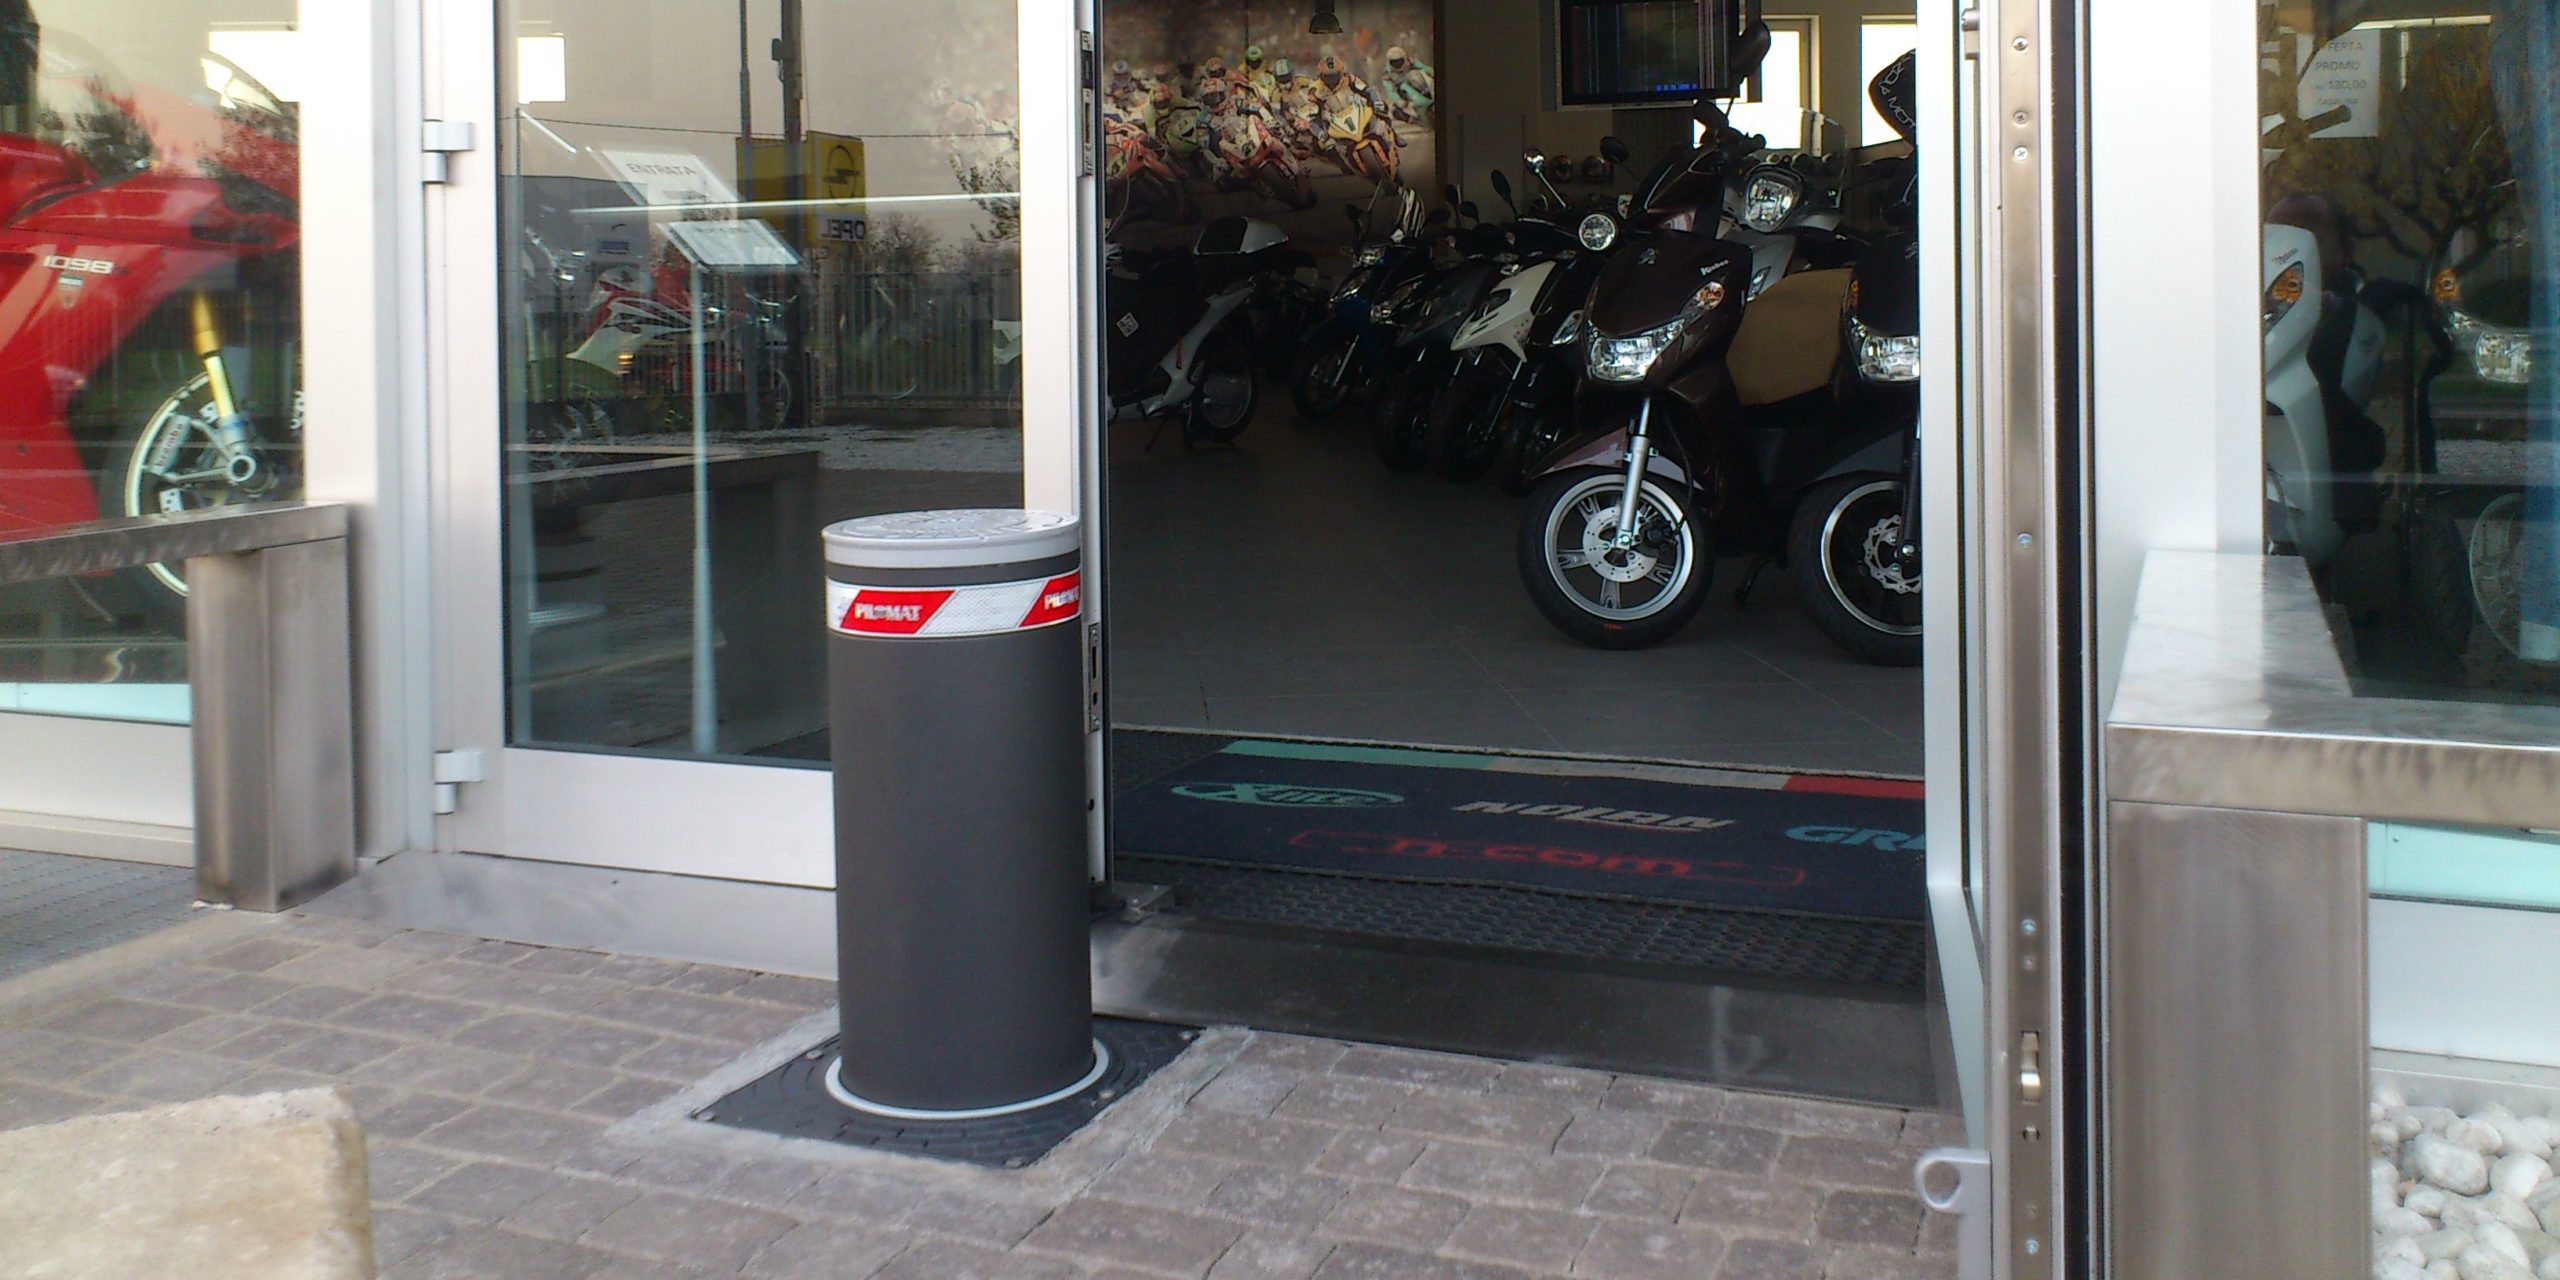 Image of an automatic bollard installed in front of a shop's window for protection